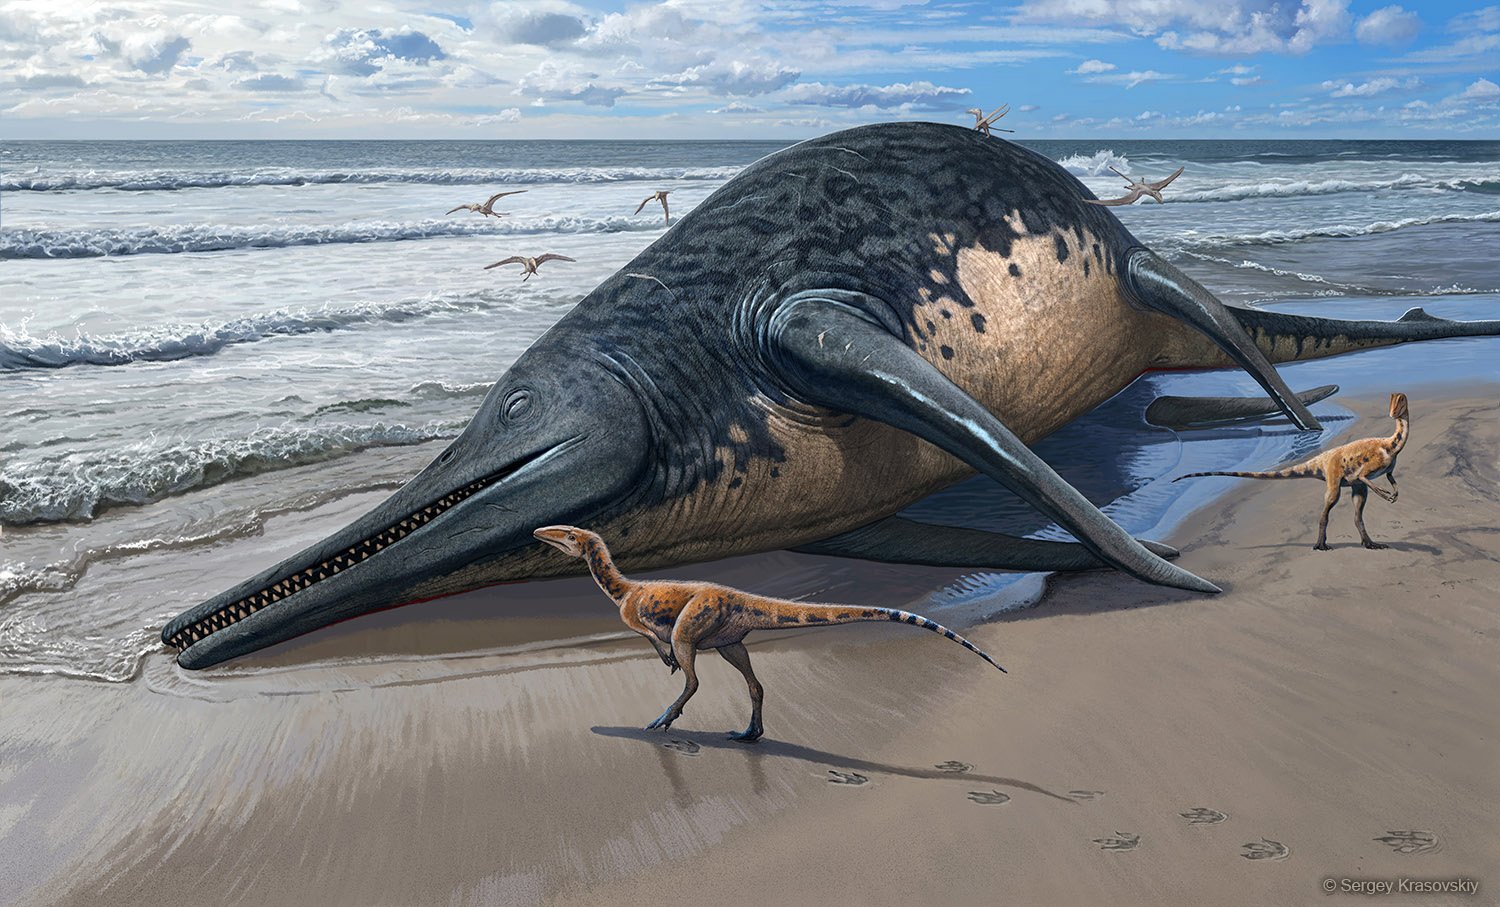 Scientists have discovered an ancient 82-foot-long 'giant fish lizard' in the UK